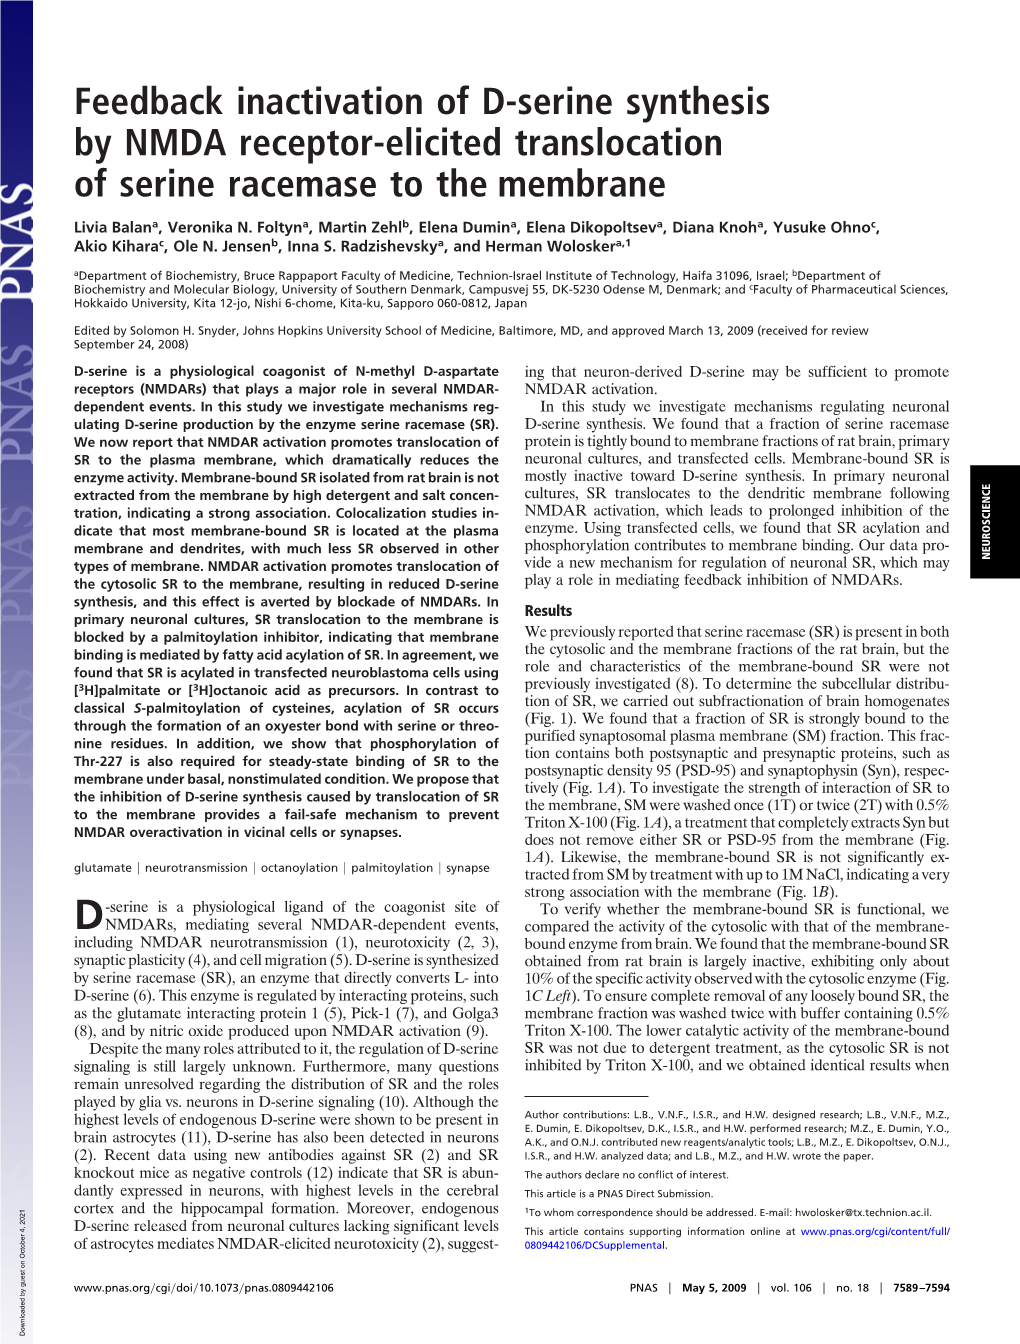 Feedback Inactivation of D-Serine Synthesis by NMDA Receptor-Elicited Translocation of Serine Racemase to the Membrane